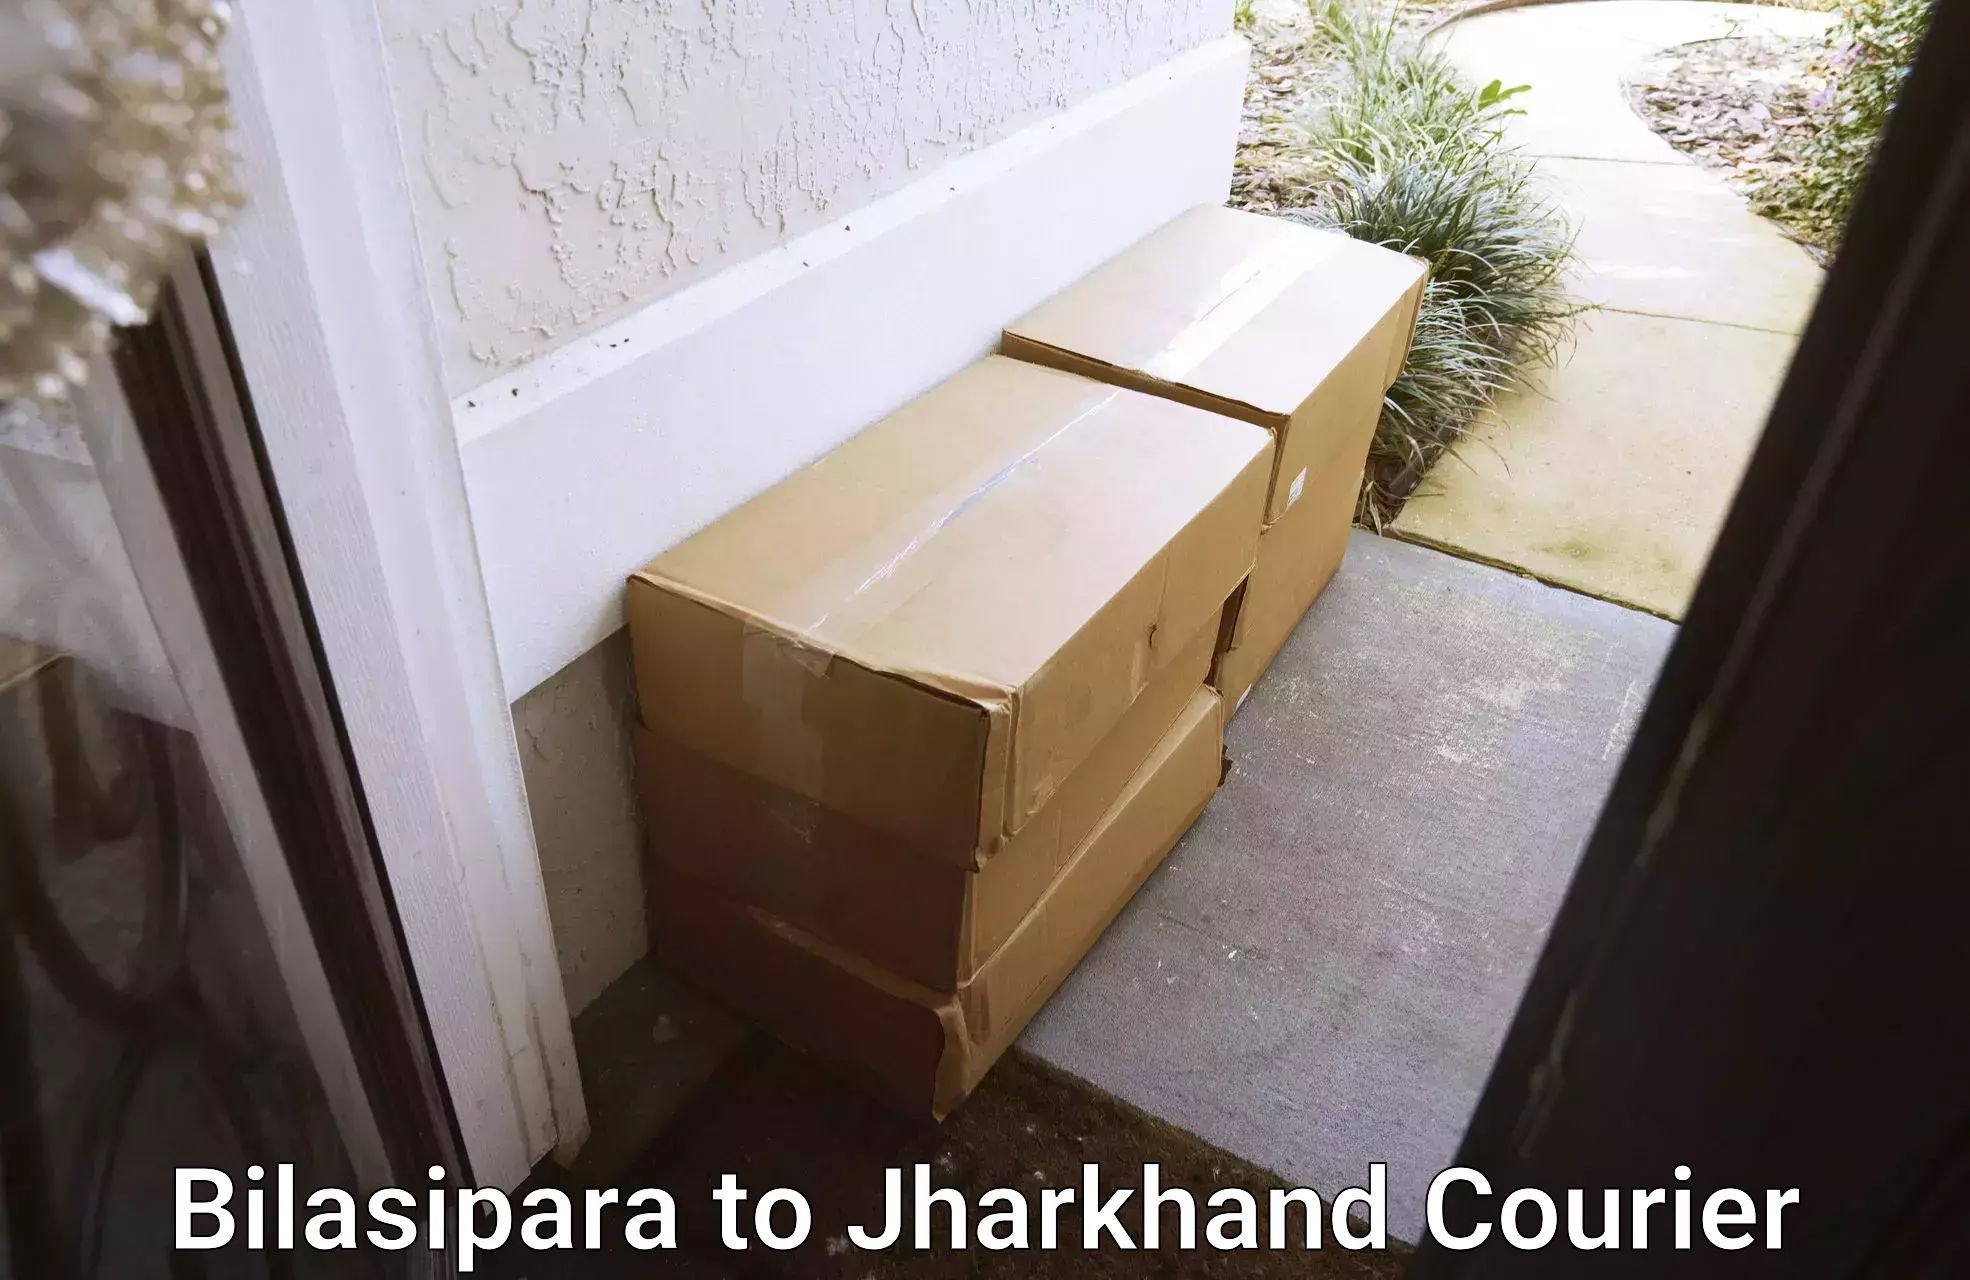 Global courier networks Bilasipara to Jharkhand